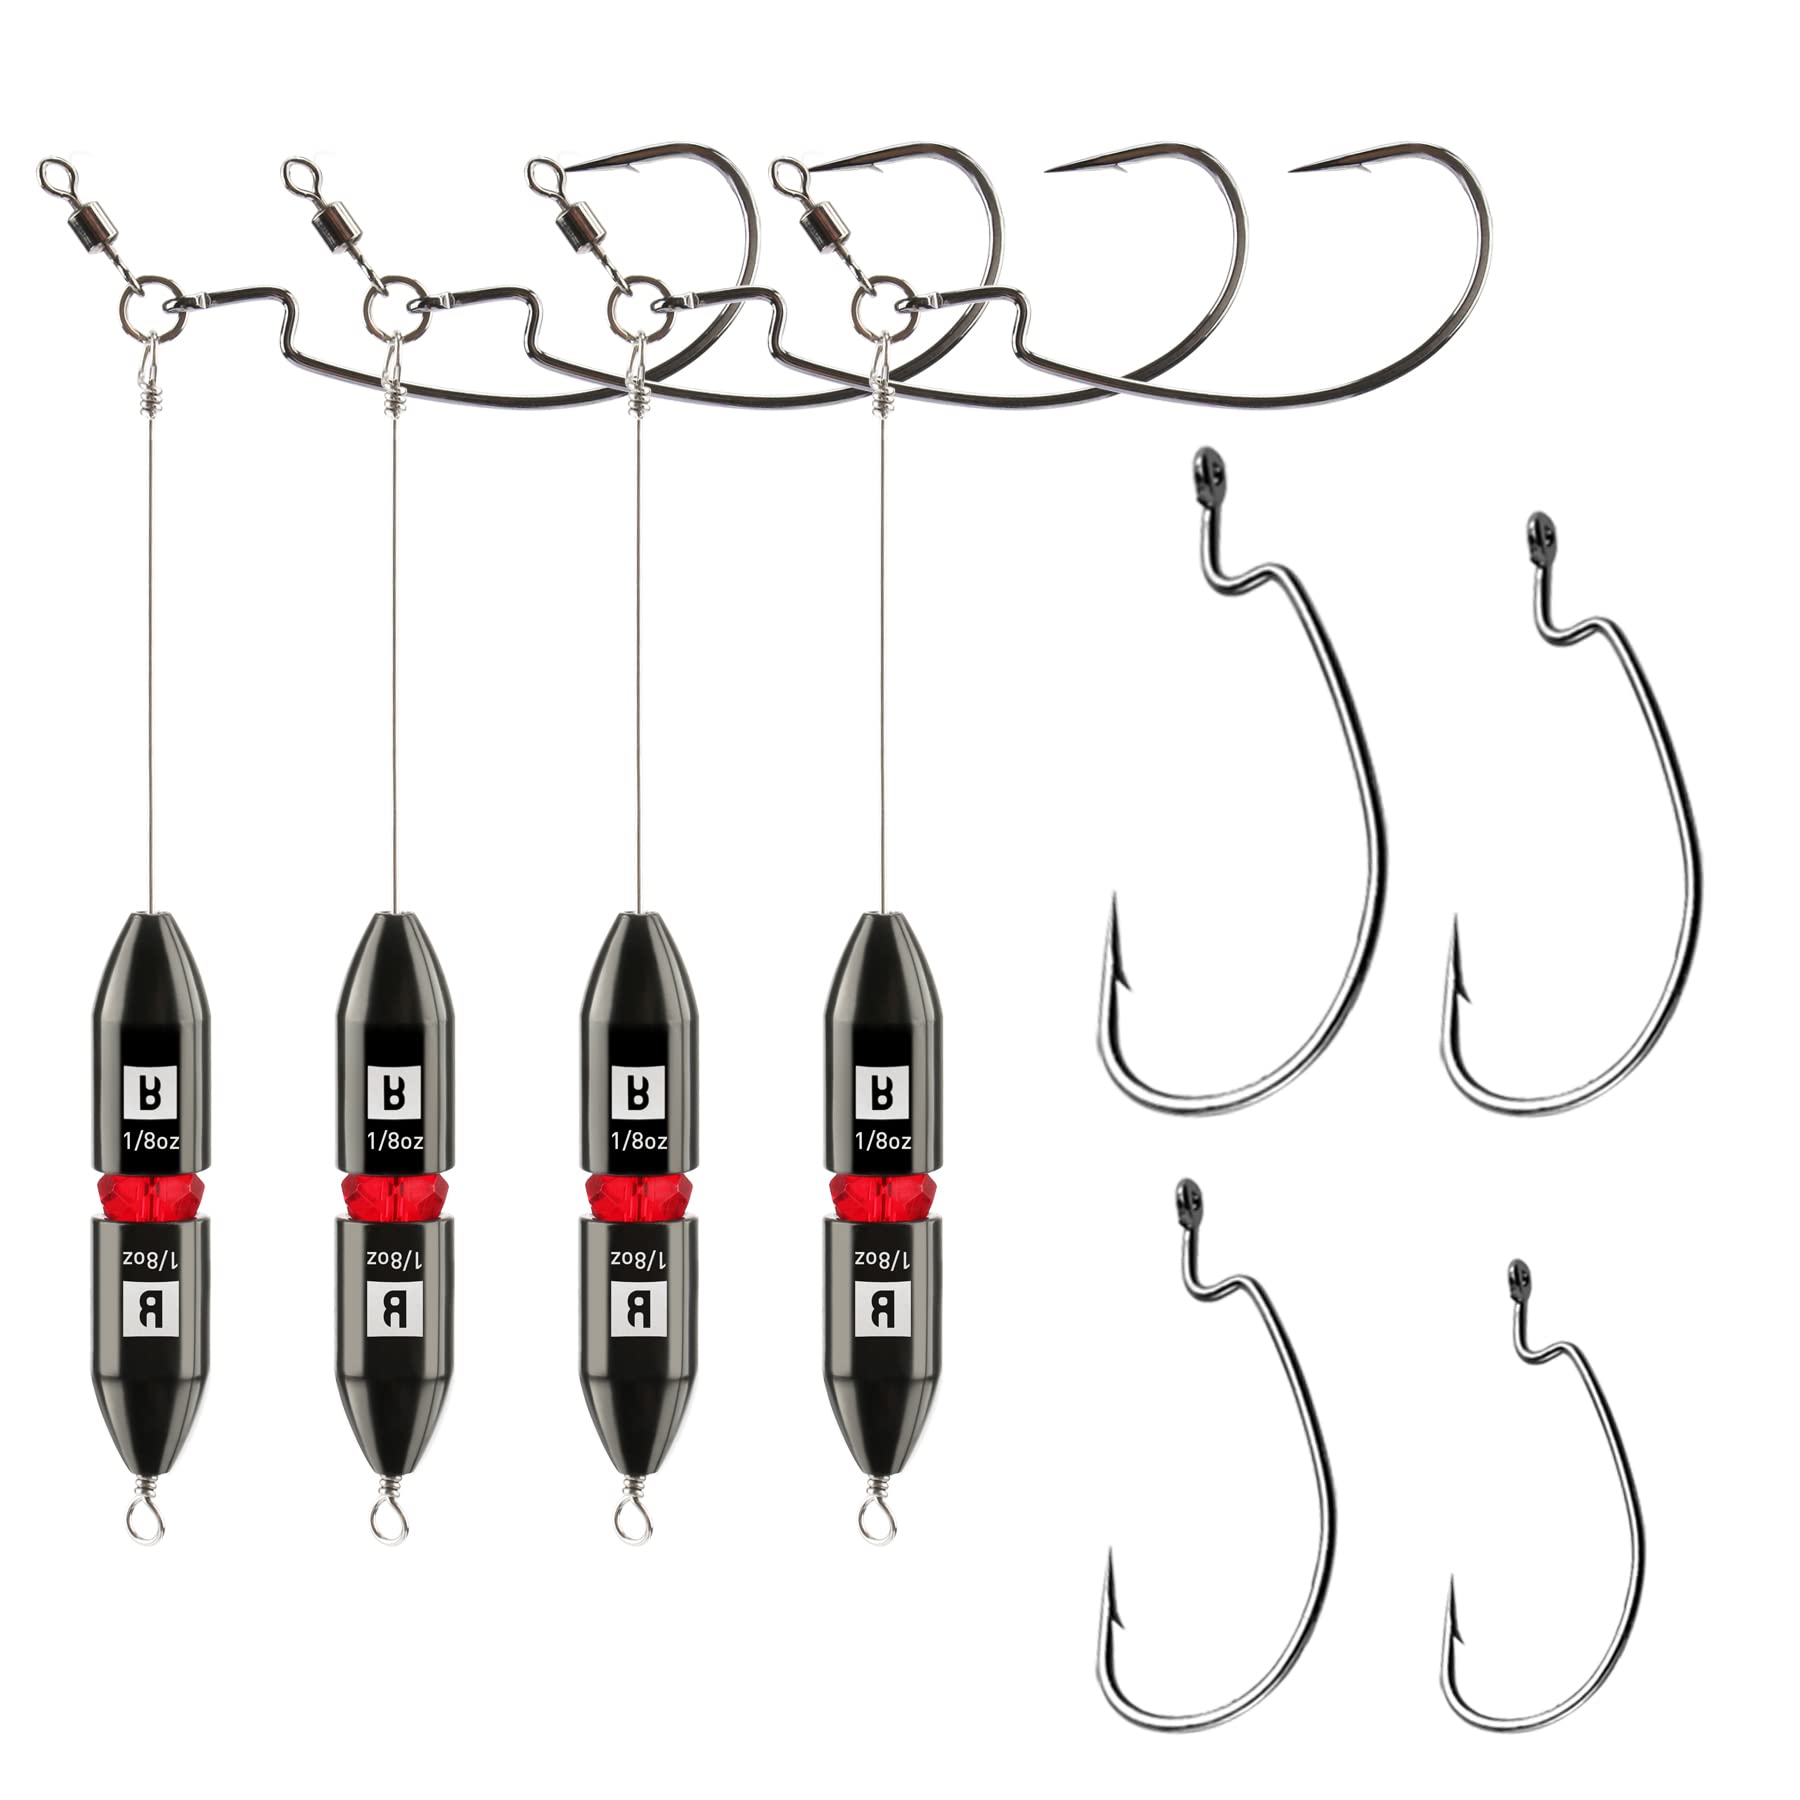 Dovesun Tokio Rig Kit Punch Shot Rig Accessories for Perch Fishing